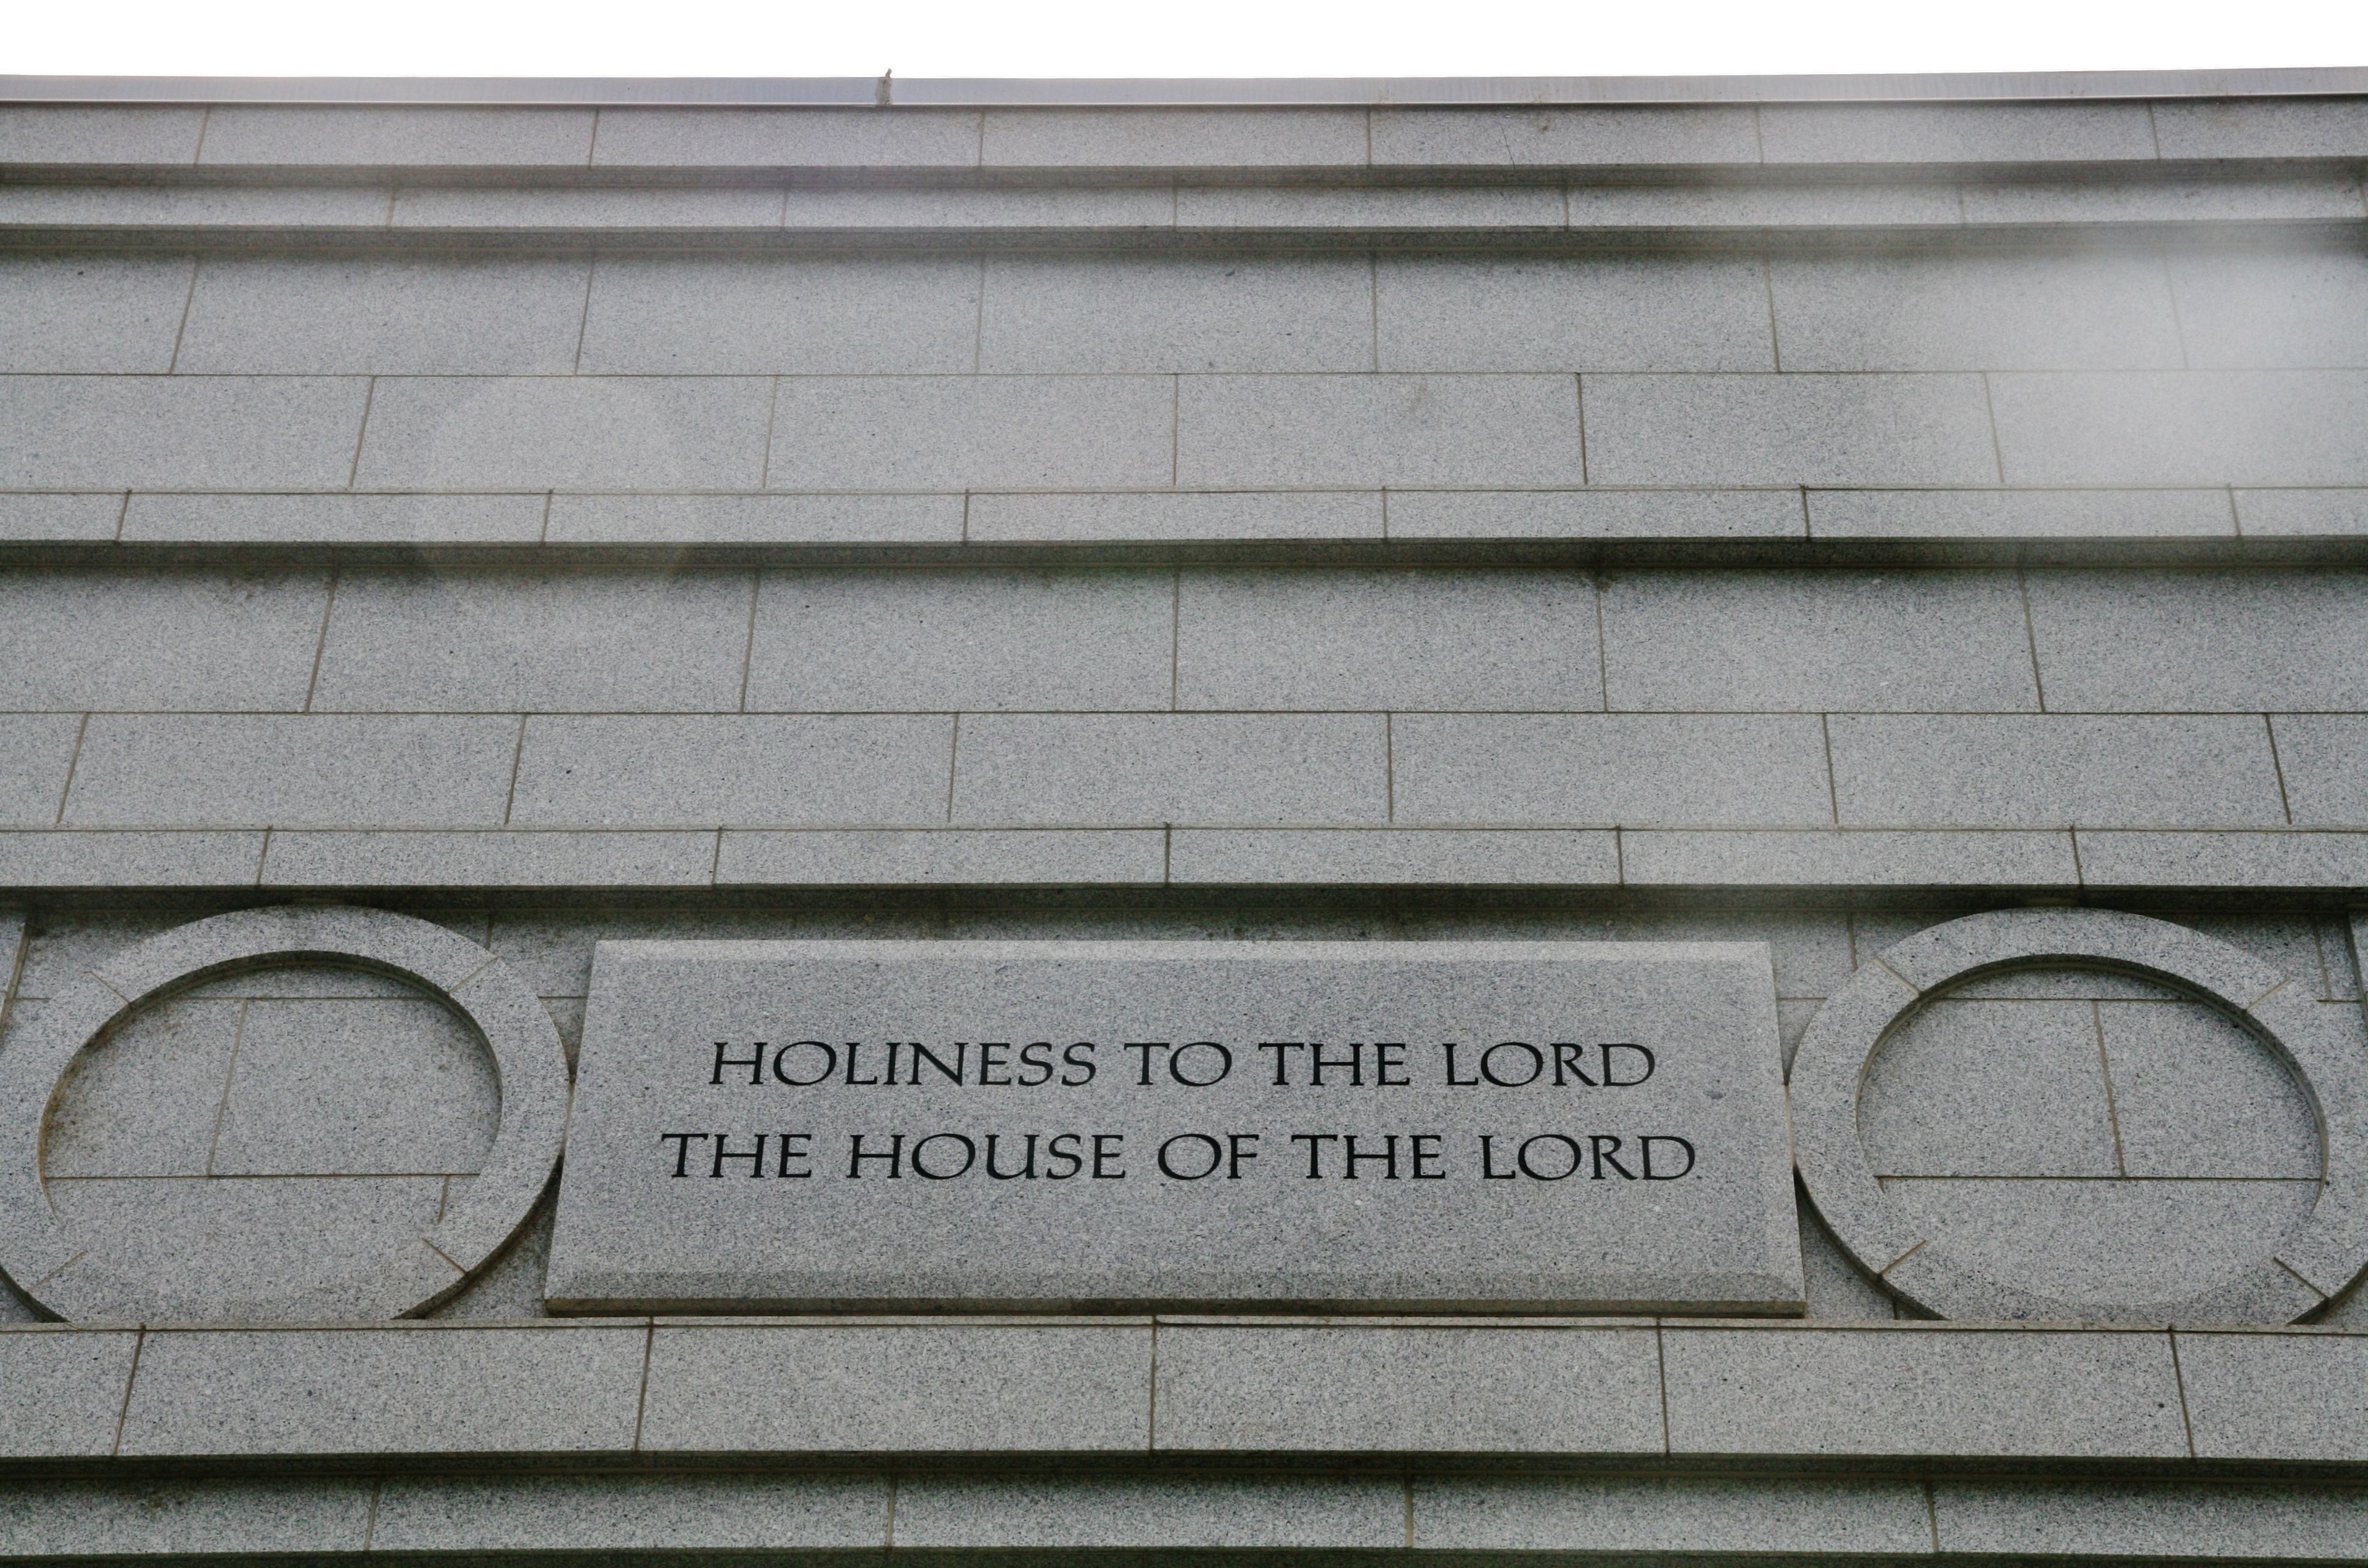 The inscription on the Fresno California Temple reads, “Holiness to the Lord: The House of the Lord.”